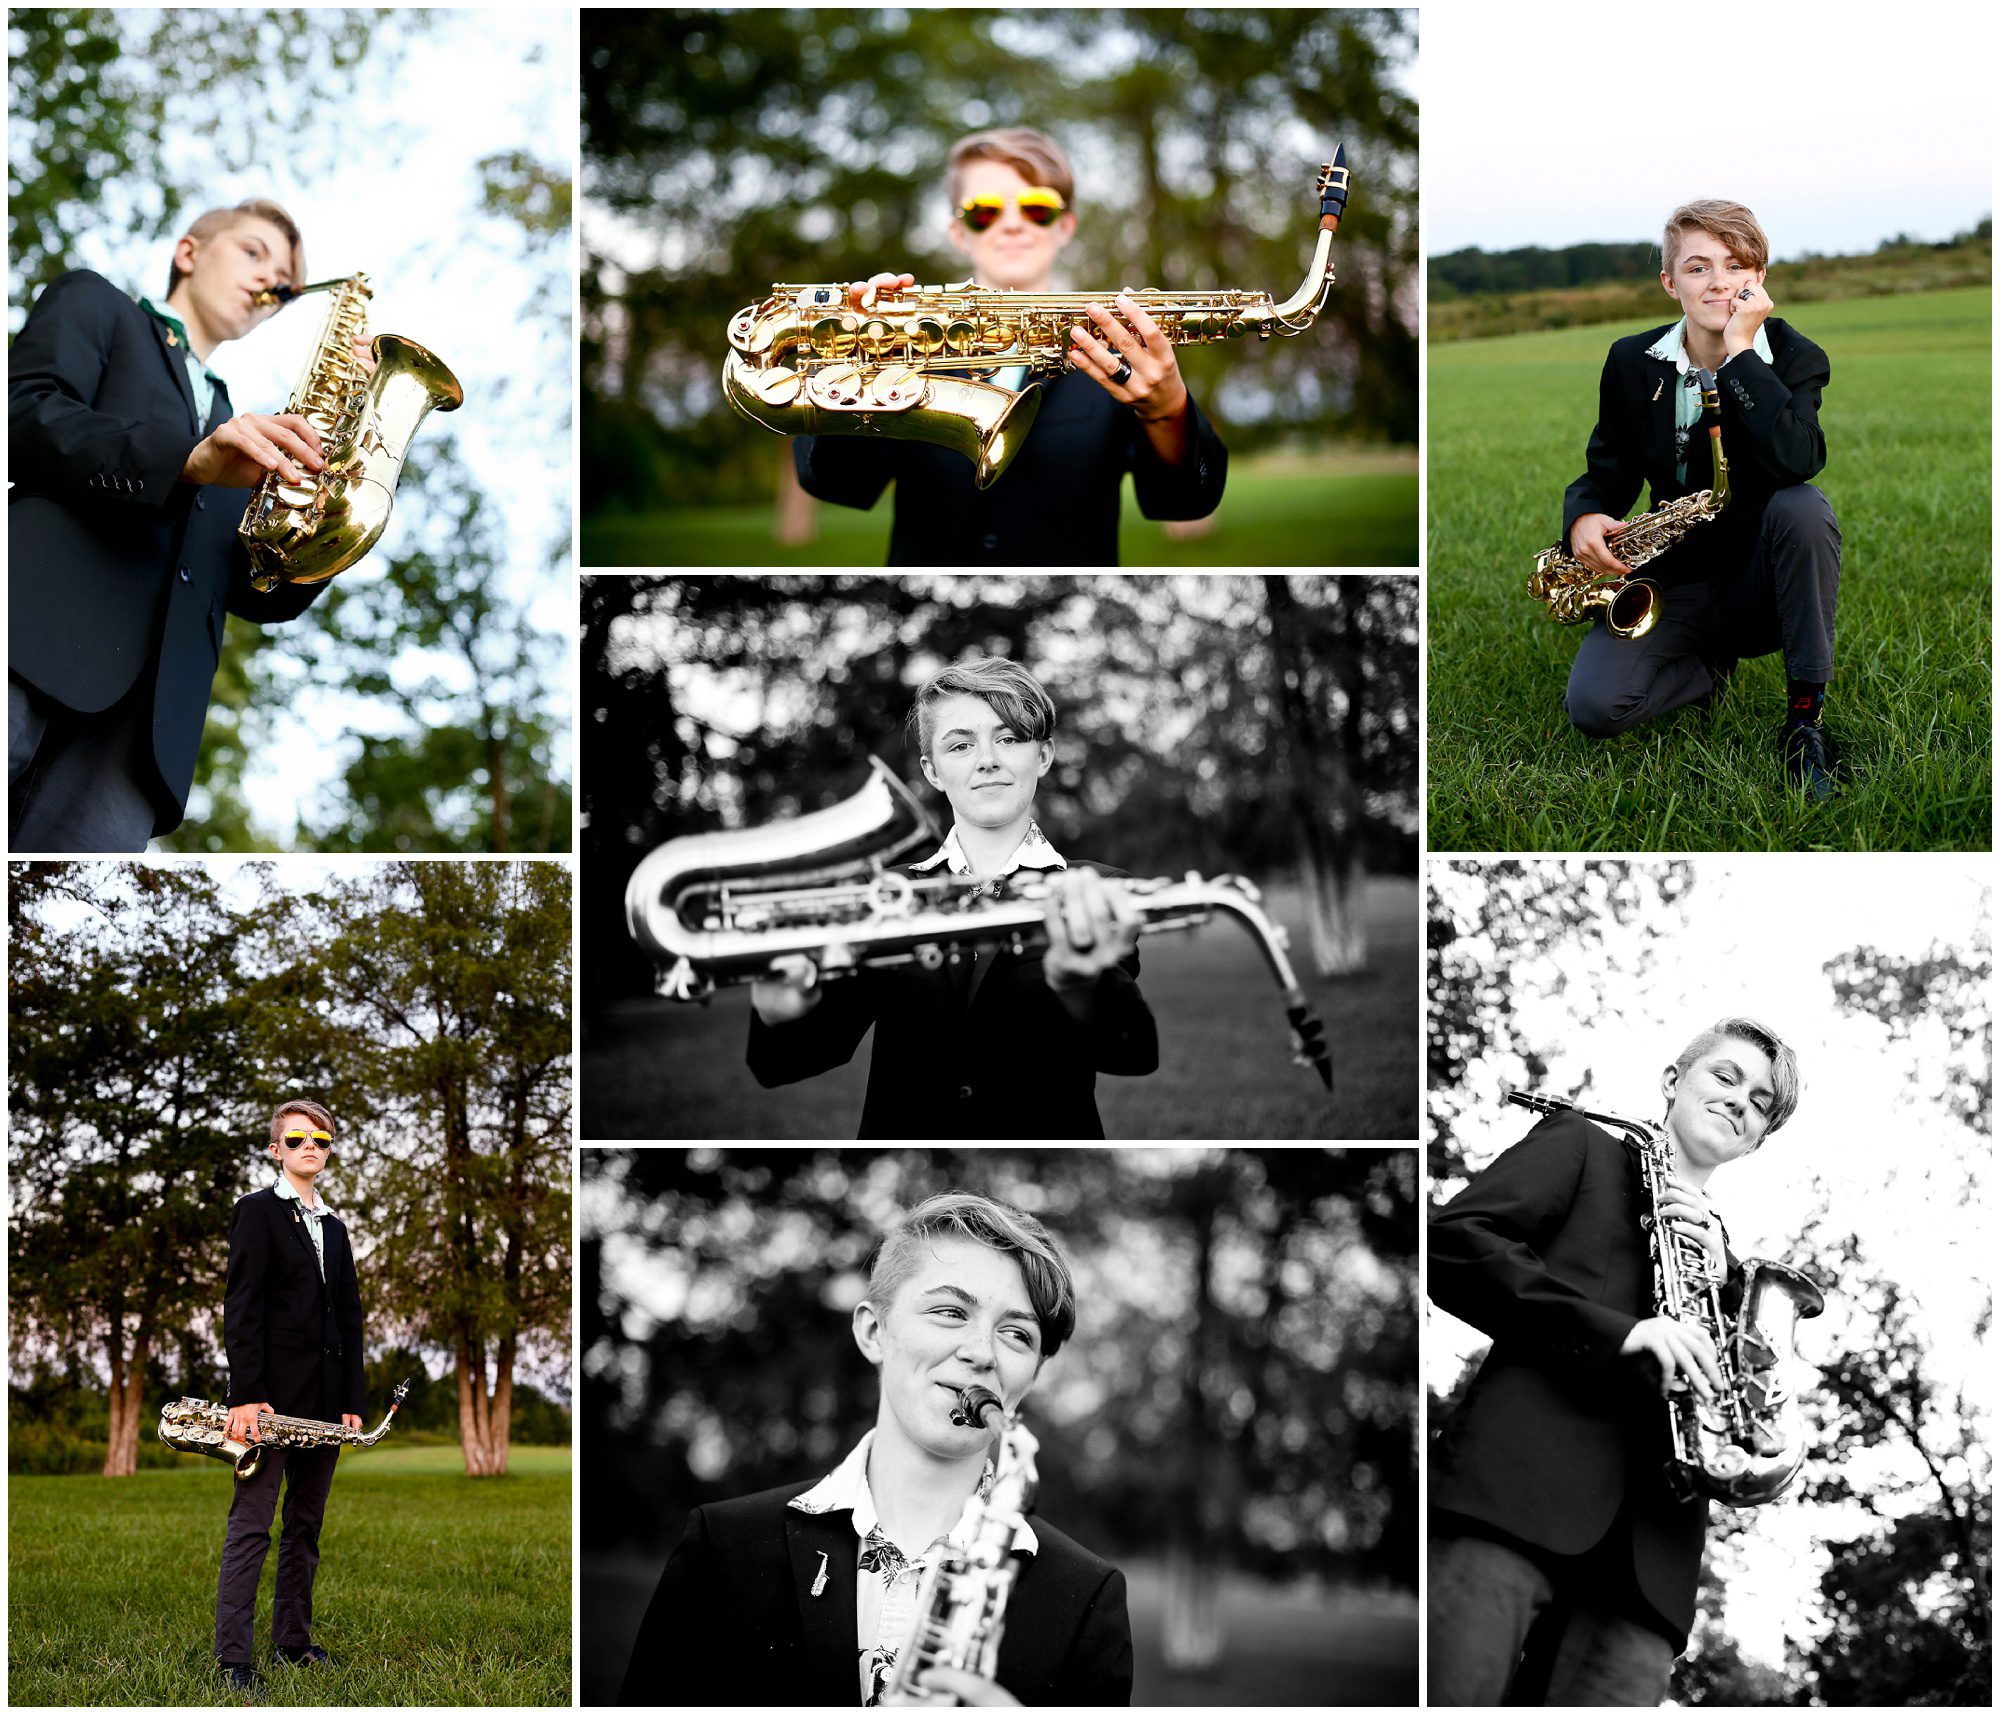 Lake Monticello Saxophone Player Senior Portraits in Fluvanna County photographer photography pictures photoshoot rural charlottesville